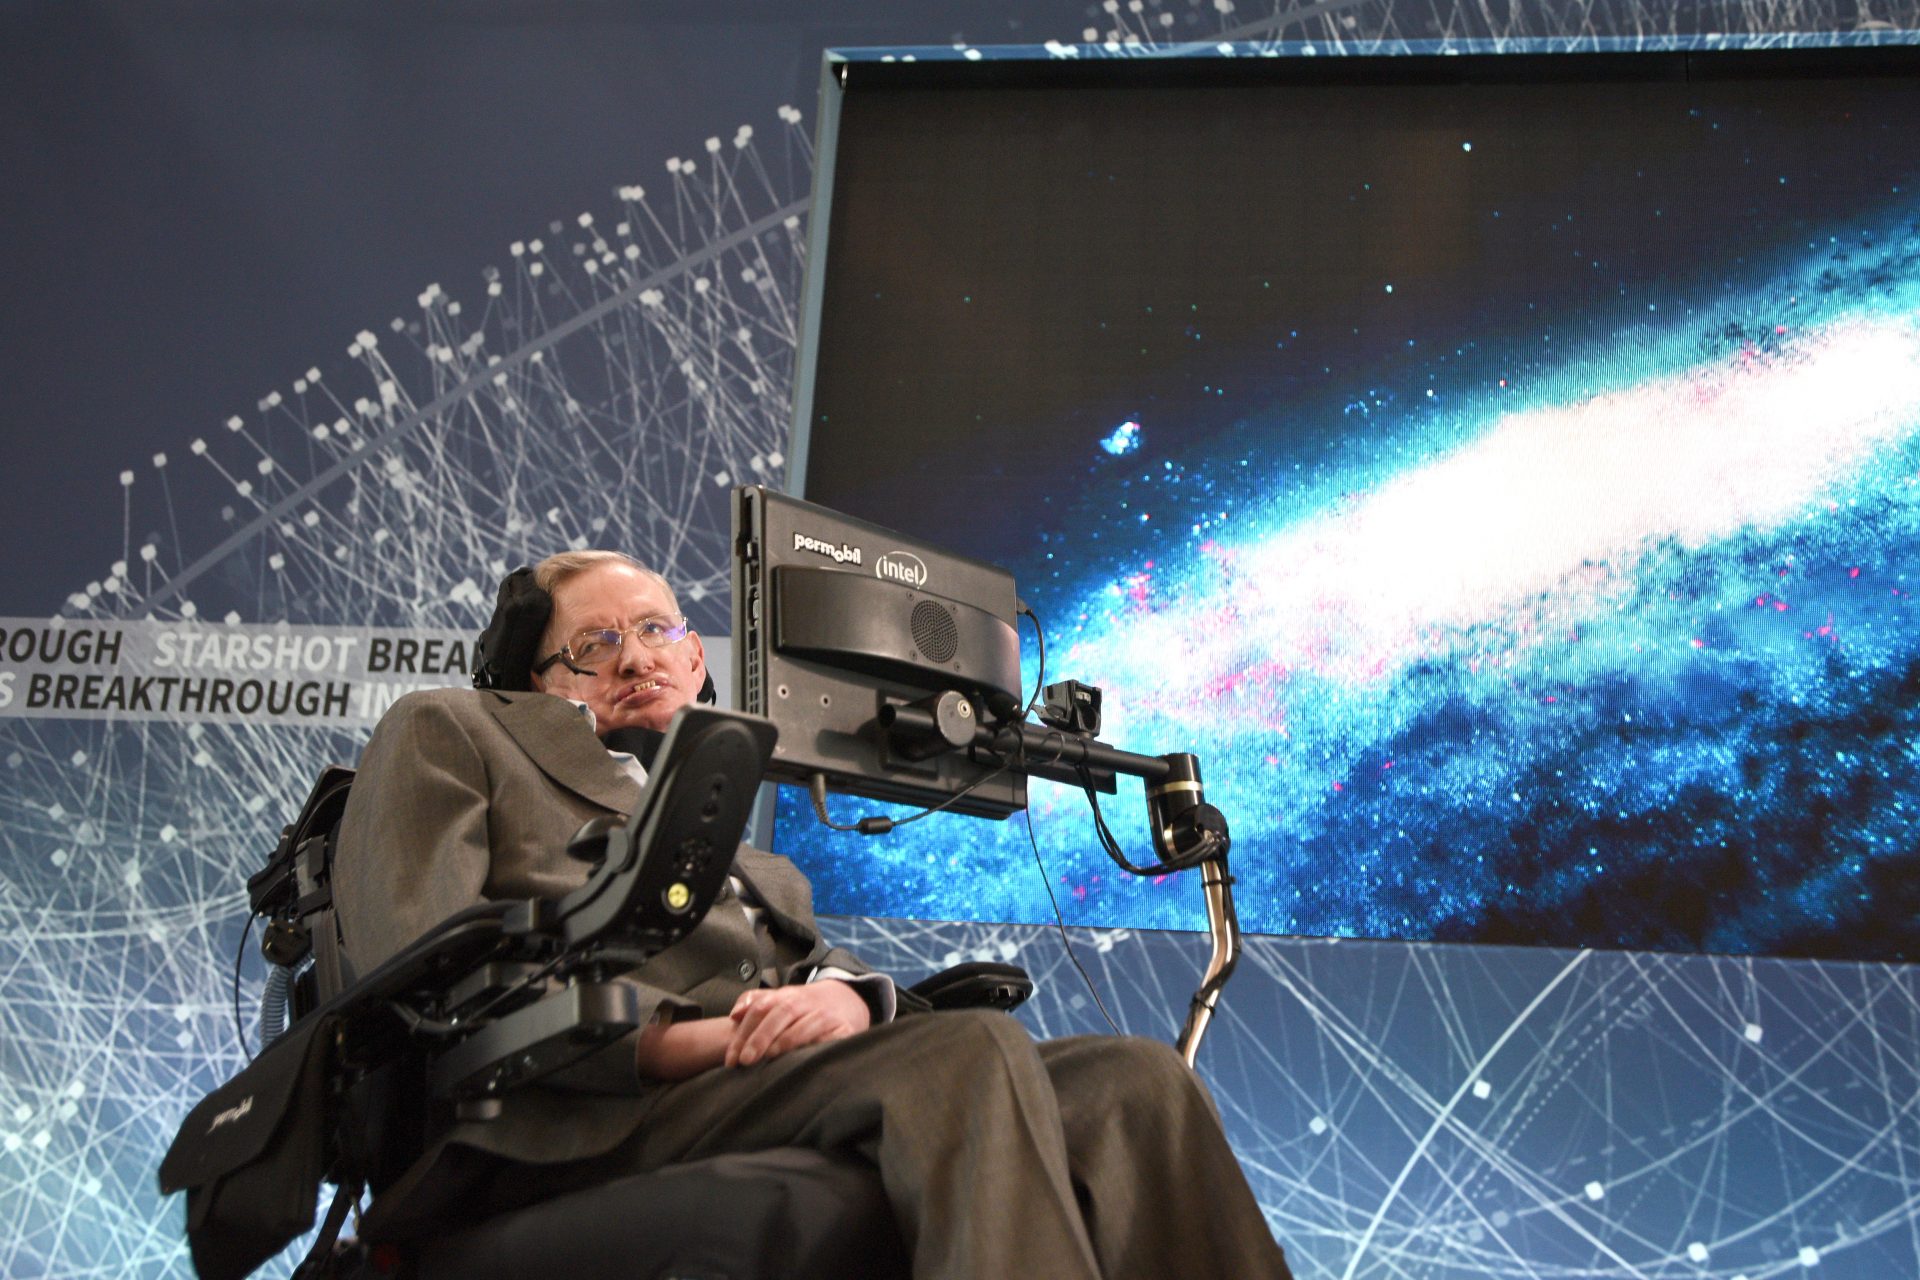 Stephen Hawking's worrying predictions: the end of the world is near!